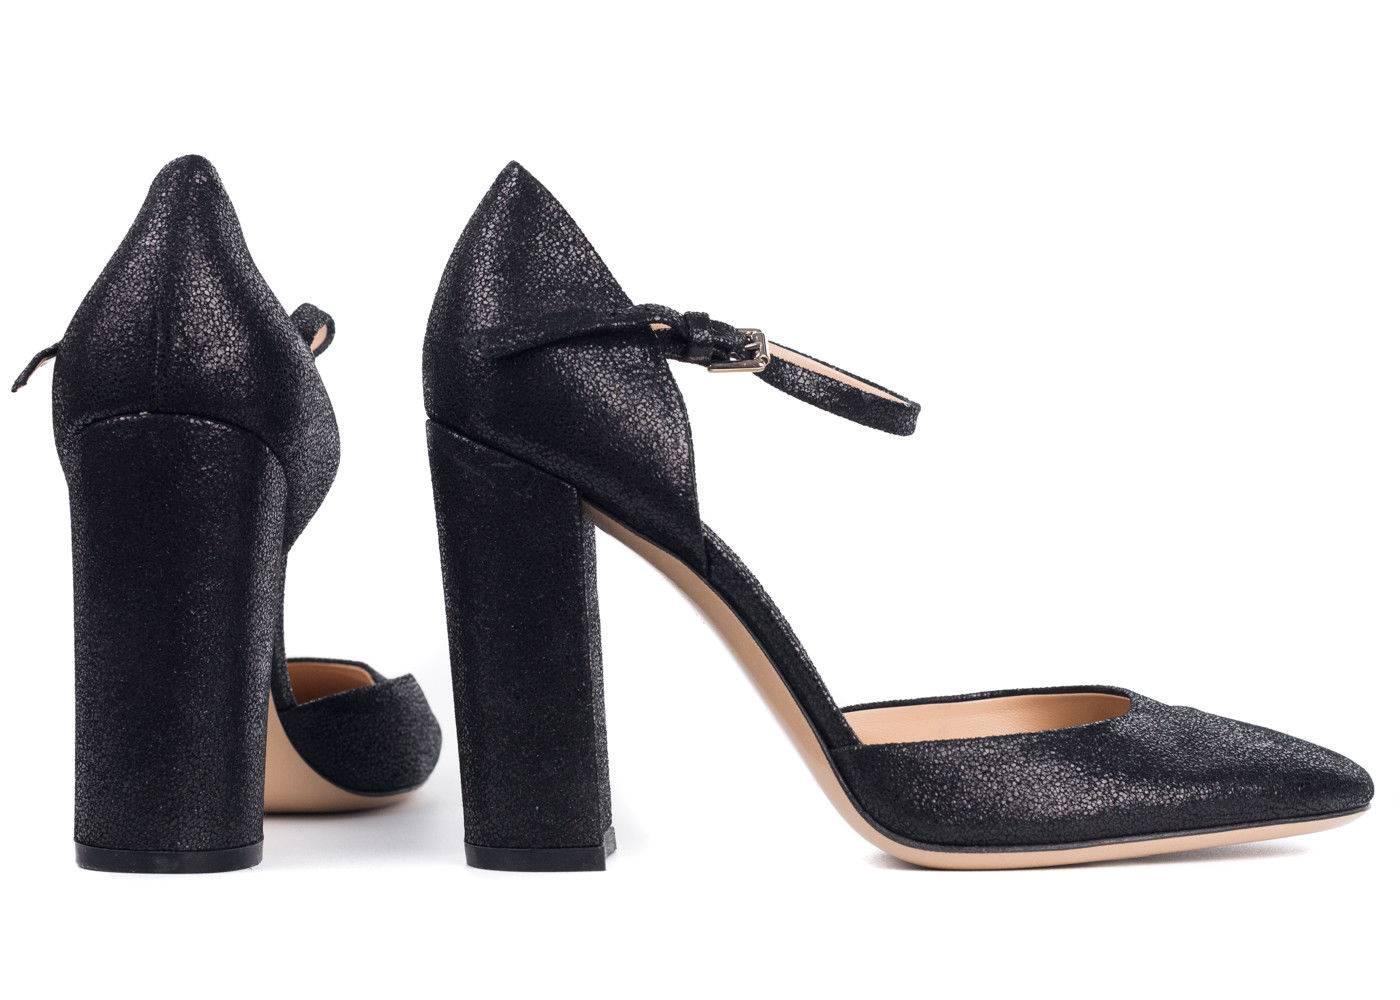 Gianvito Rossi Black Glitter Suede Ankle Strap Block Heel Pumps In New Condition For Sale In Brooklyn, NY